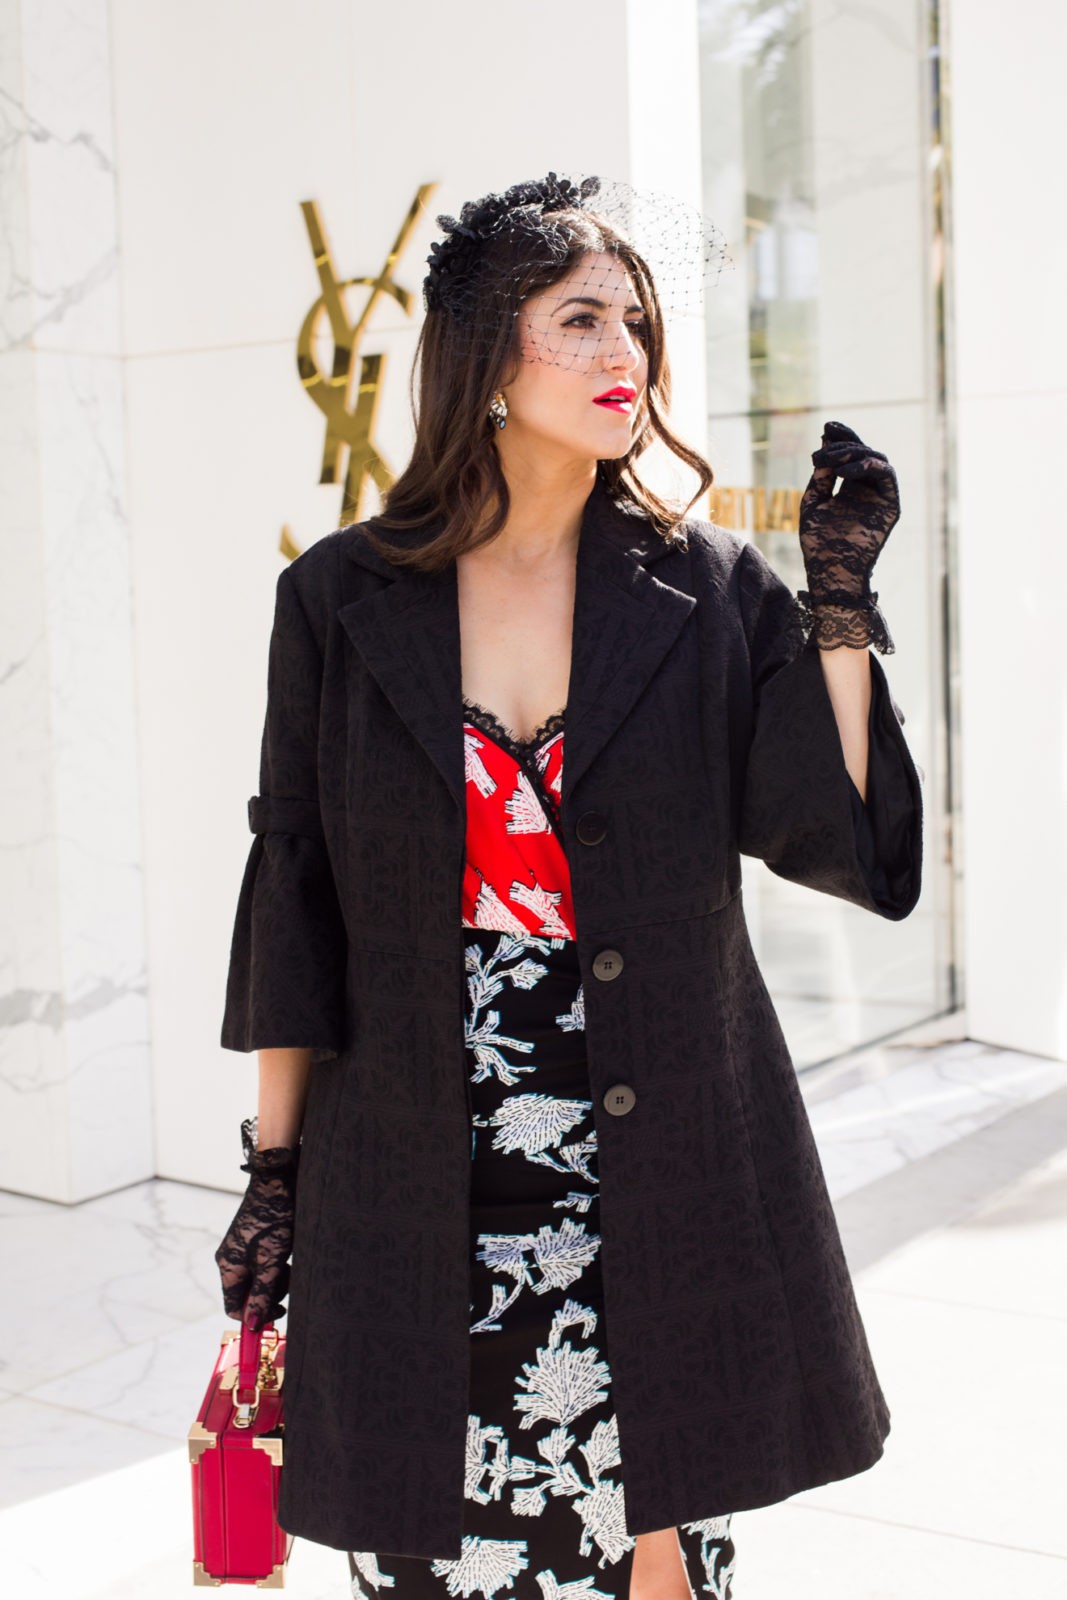 Romantic Date Night Dresses featured by top US fashion blogger Laura Lily; Image of a woman wearing DVF dress, Stuart Weitzman sandals, Asos Veil, vintage jacket, Izzy + Ali bag and Lace gloves from eBay.